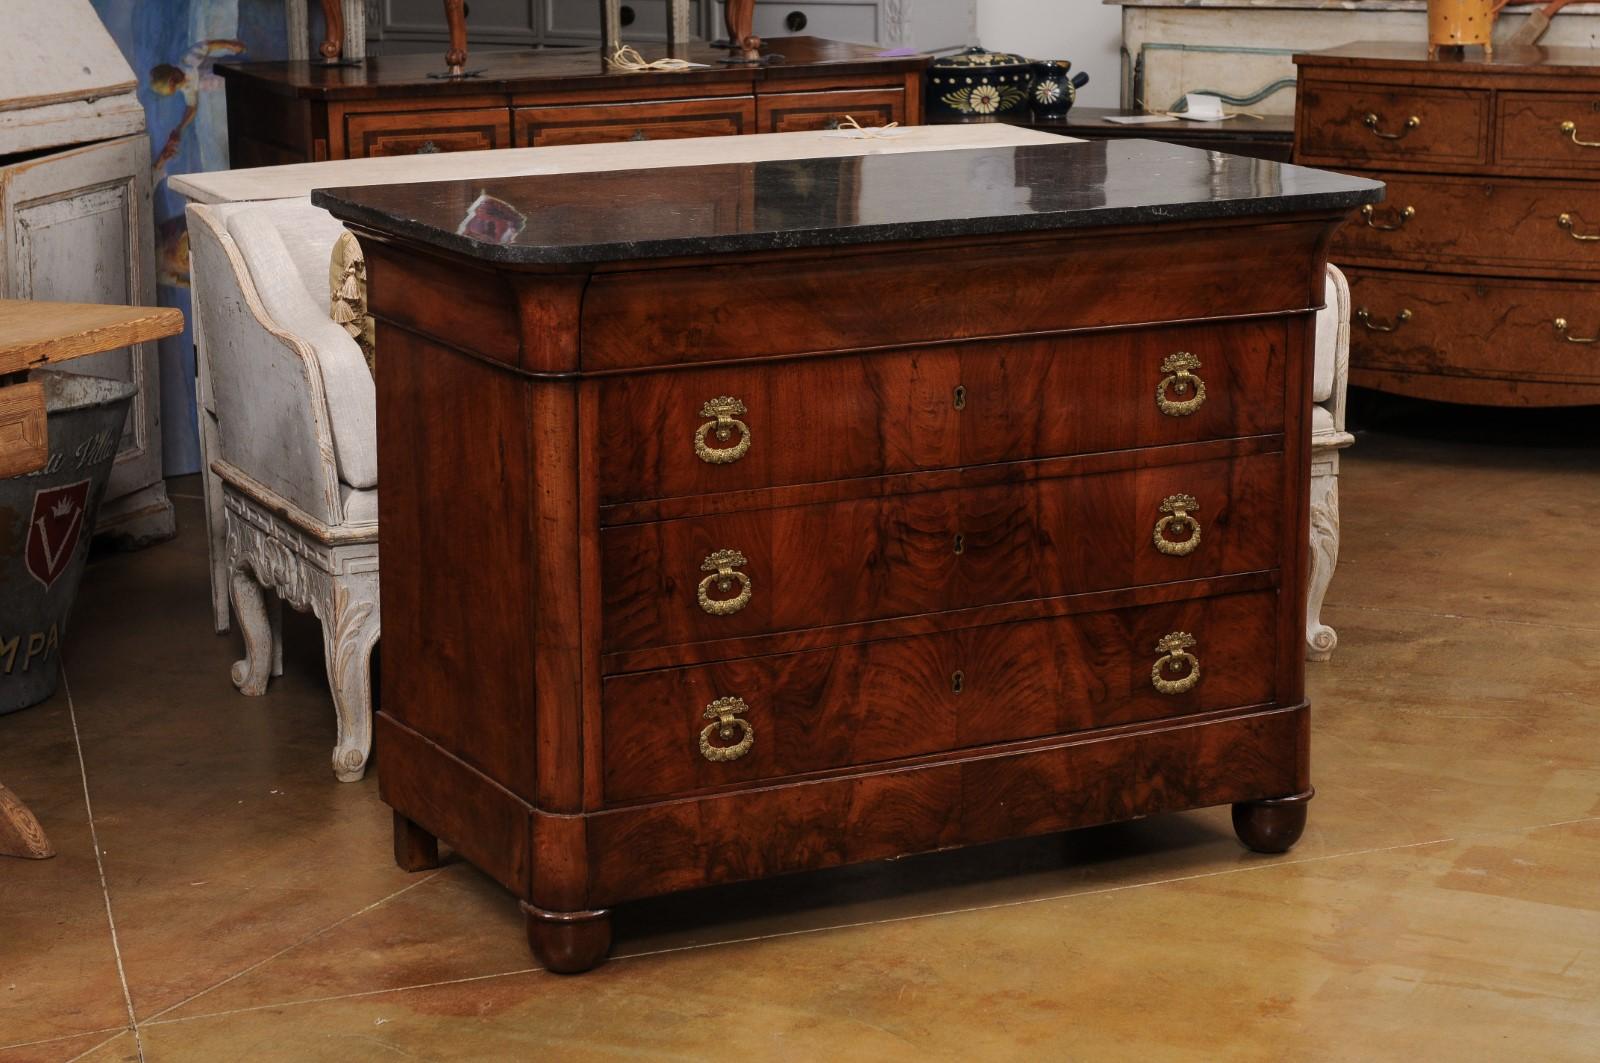 Carved Italian Empire Style 1890s Marble Top Four-Drawer Commode with Bronze Hardware For Sale